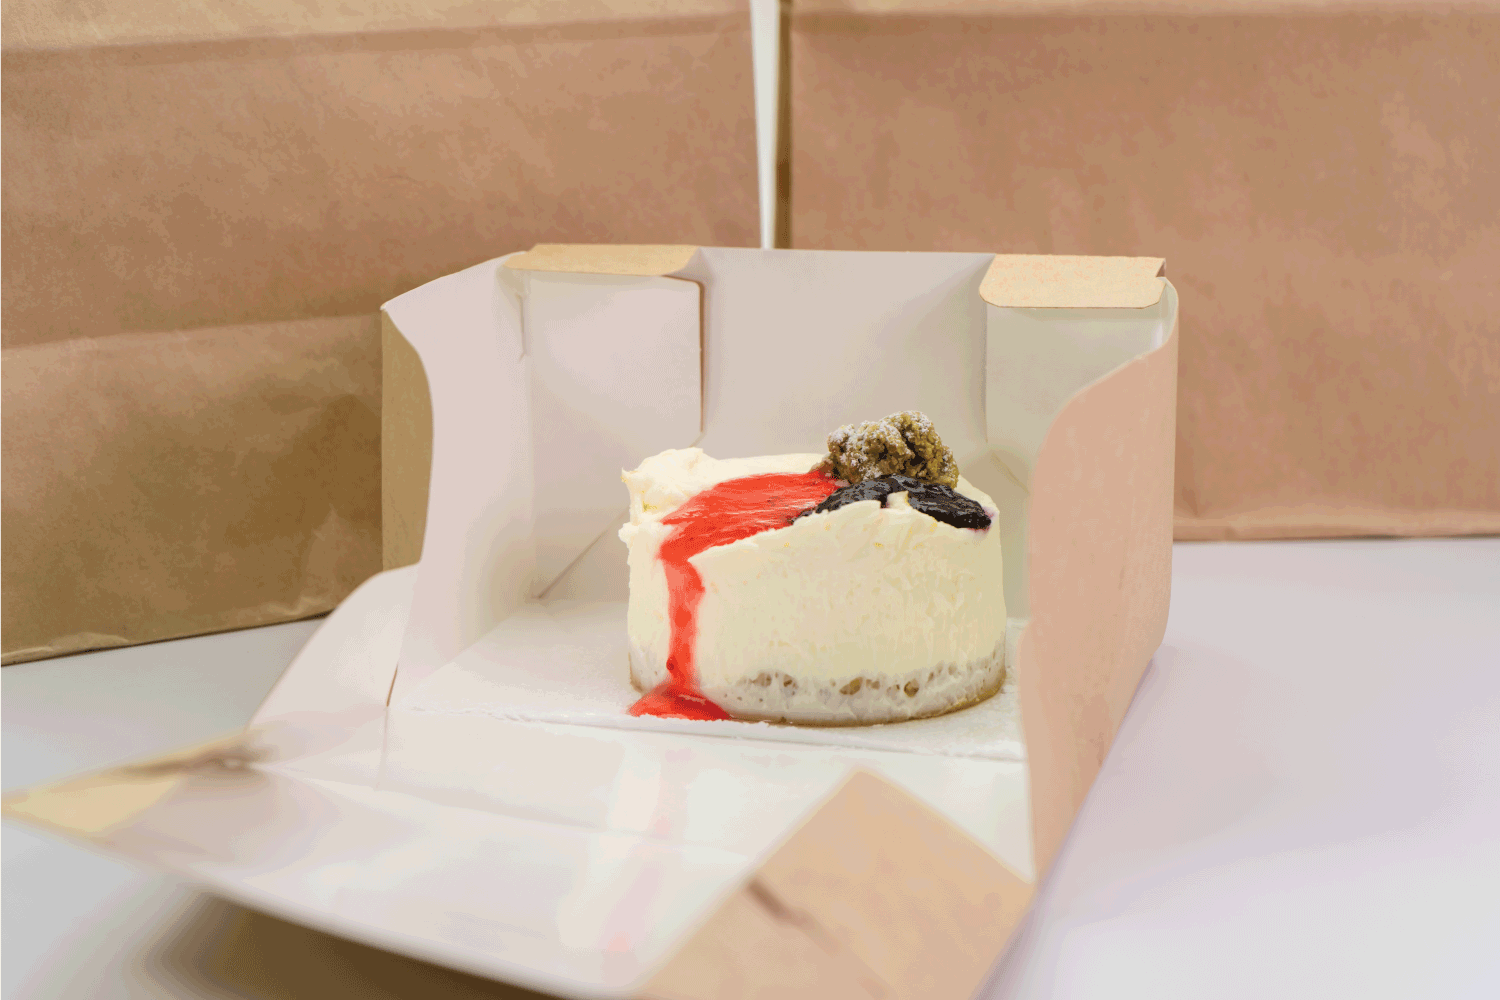 Delicious cheesecake in eco packaging, food and dessert delivery concept.